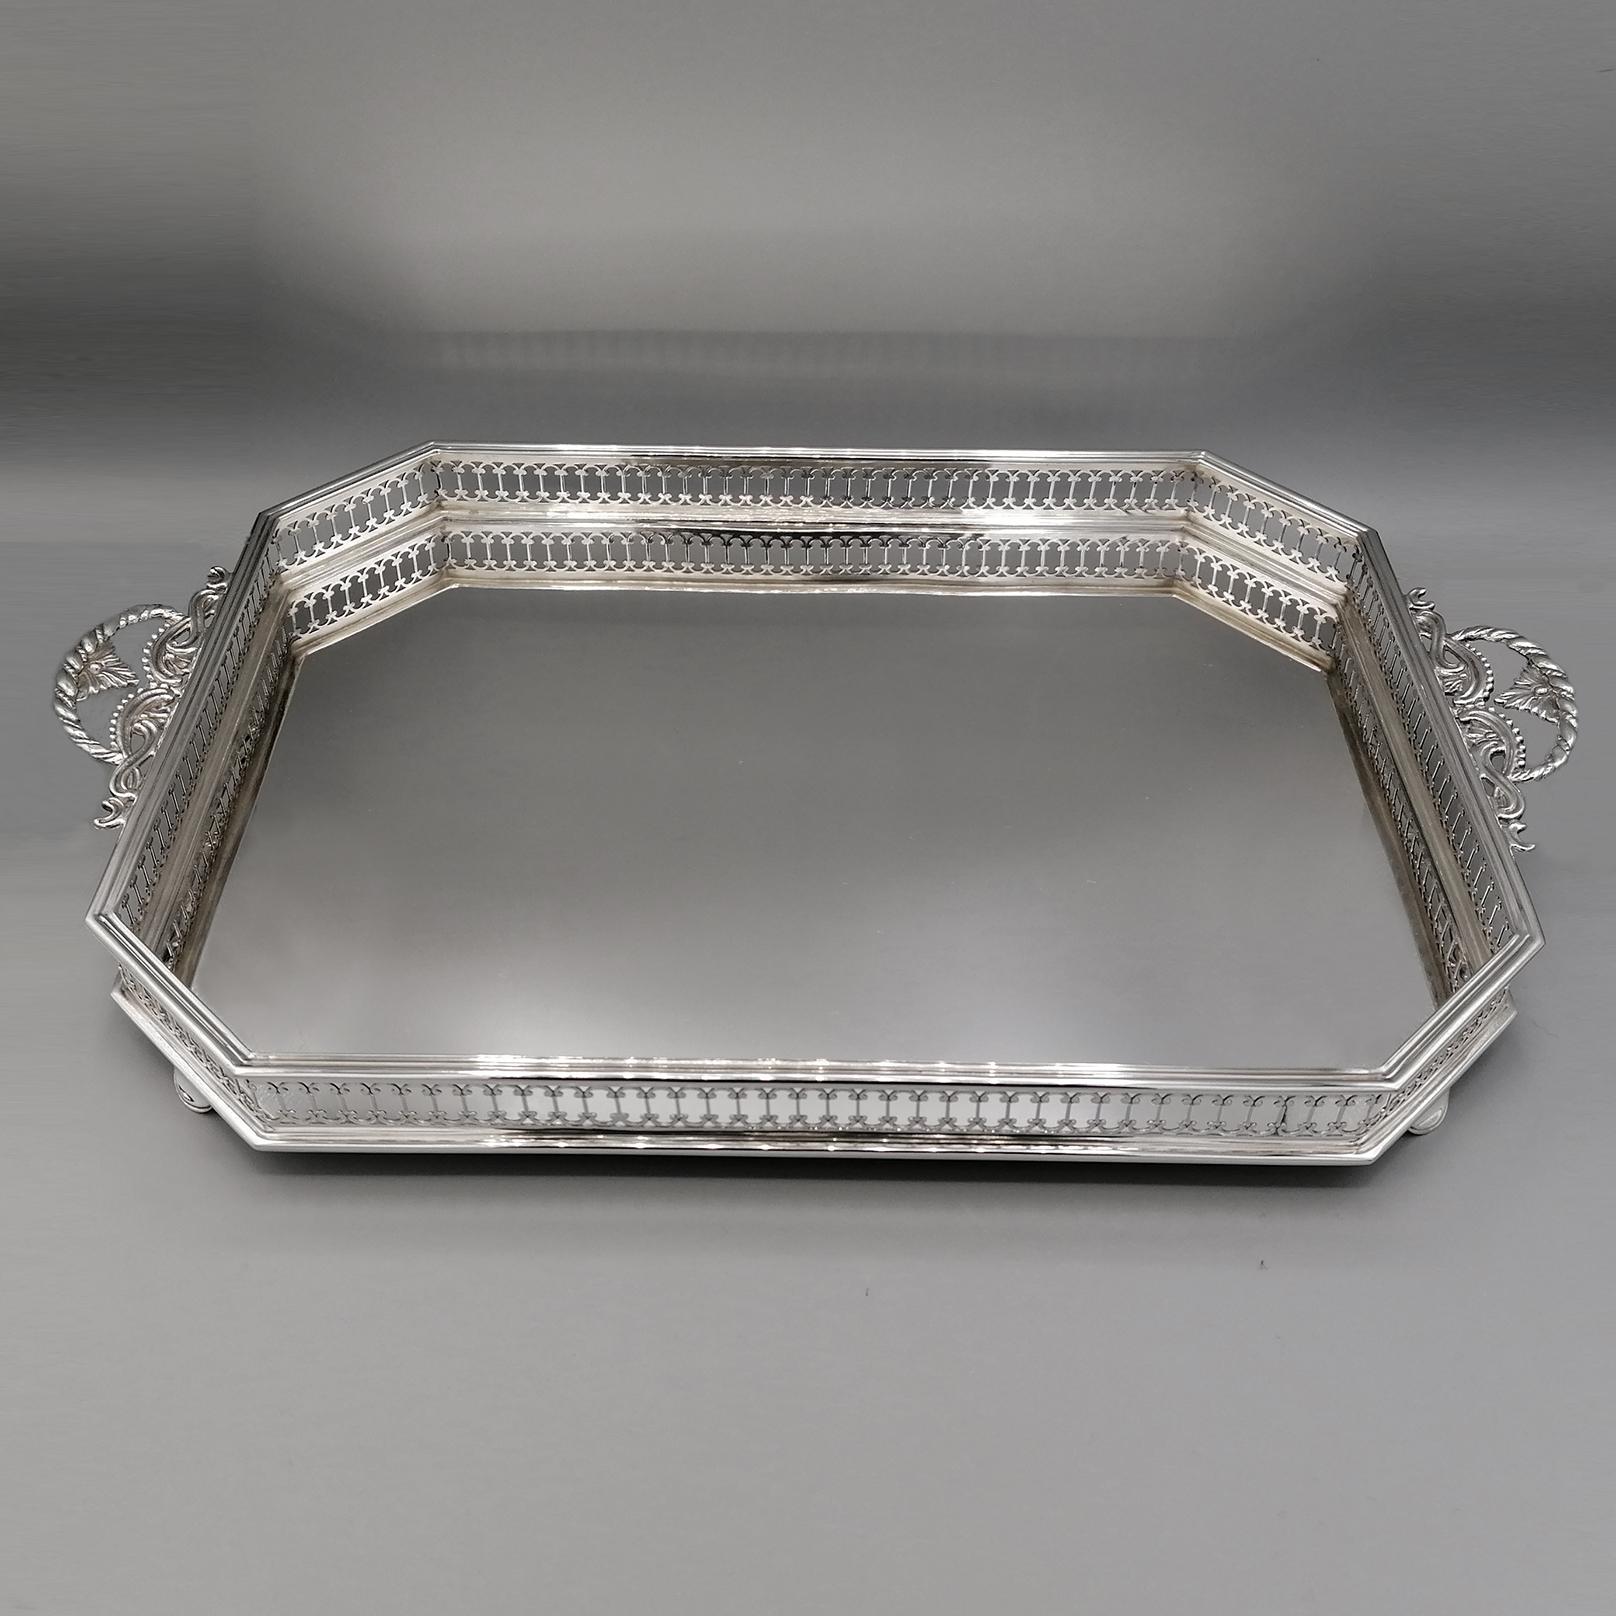 Sterling silver octagonal rectangular shaped tray.
The edge is finely gallery worked.
An English border has been welded on the upper part to join the handwork and make the whole structure solid.
The inside of the tray is polished and without